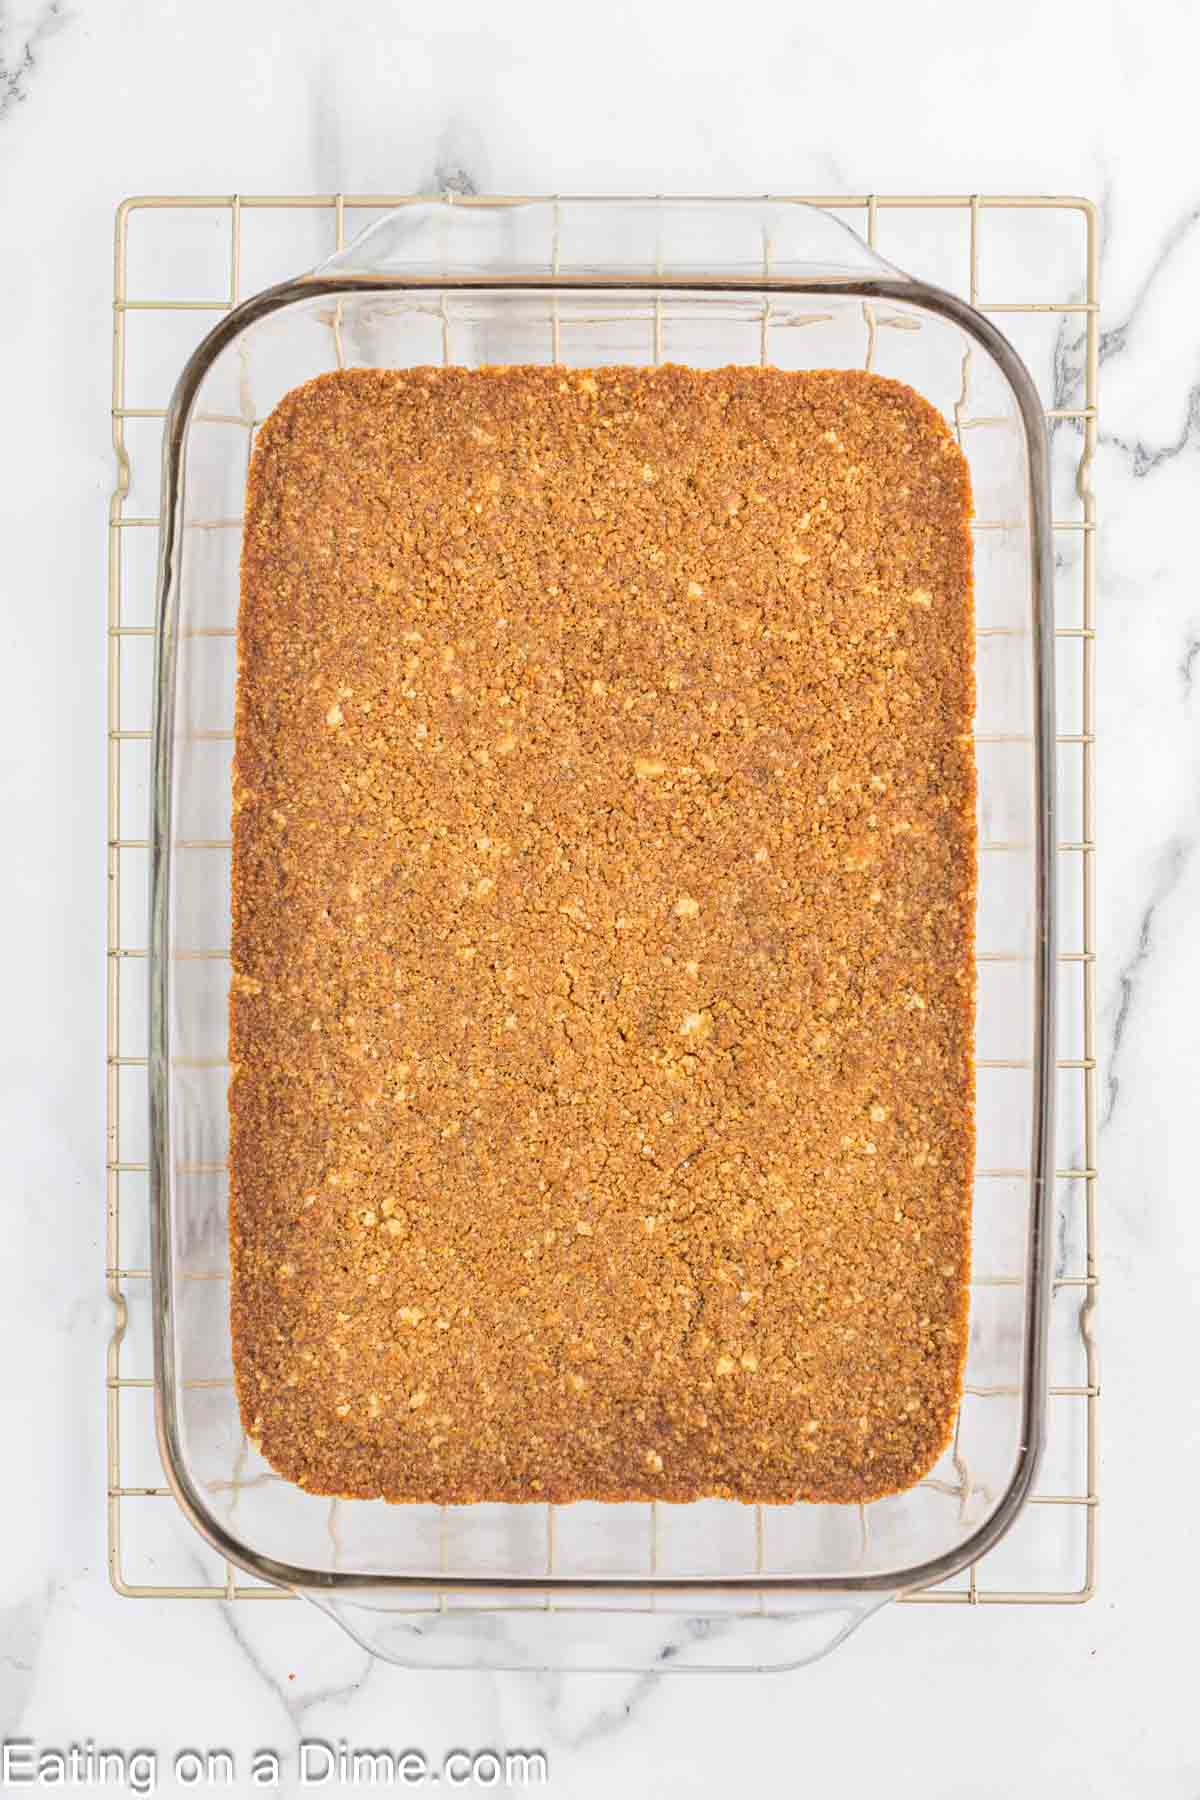 A large glass baking dish filled with evenly browned, baked oatmeal sits on a wire cooling rack atop a white marble surface. The dish's contents have a crumbly texture and are slightly cracked on the surface. The text "Eating on a Dime.com" is visible at the bottom, featuring the strawberry crunch bars recipe.